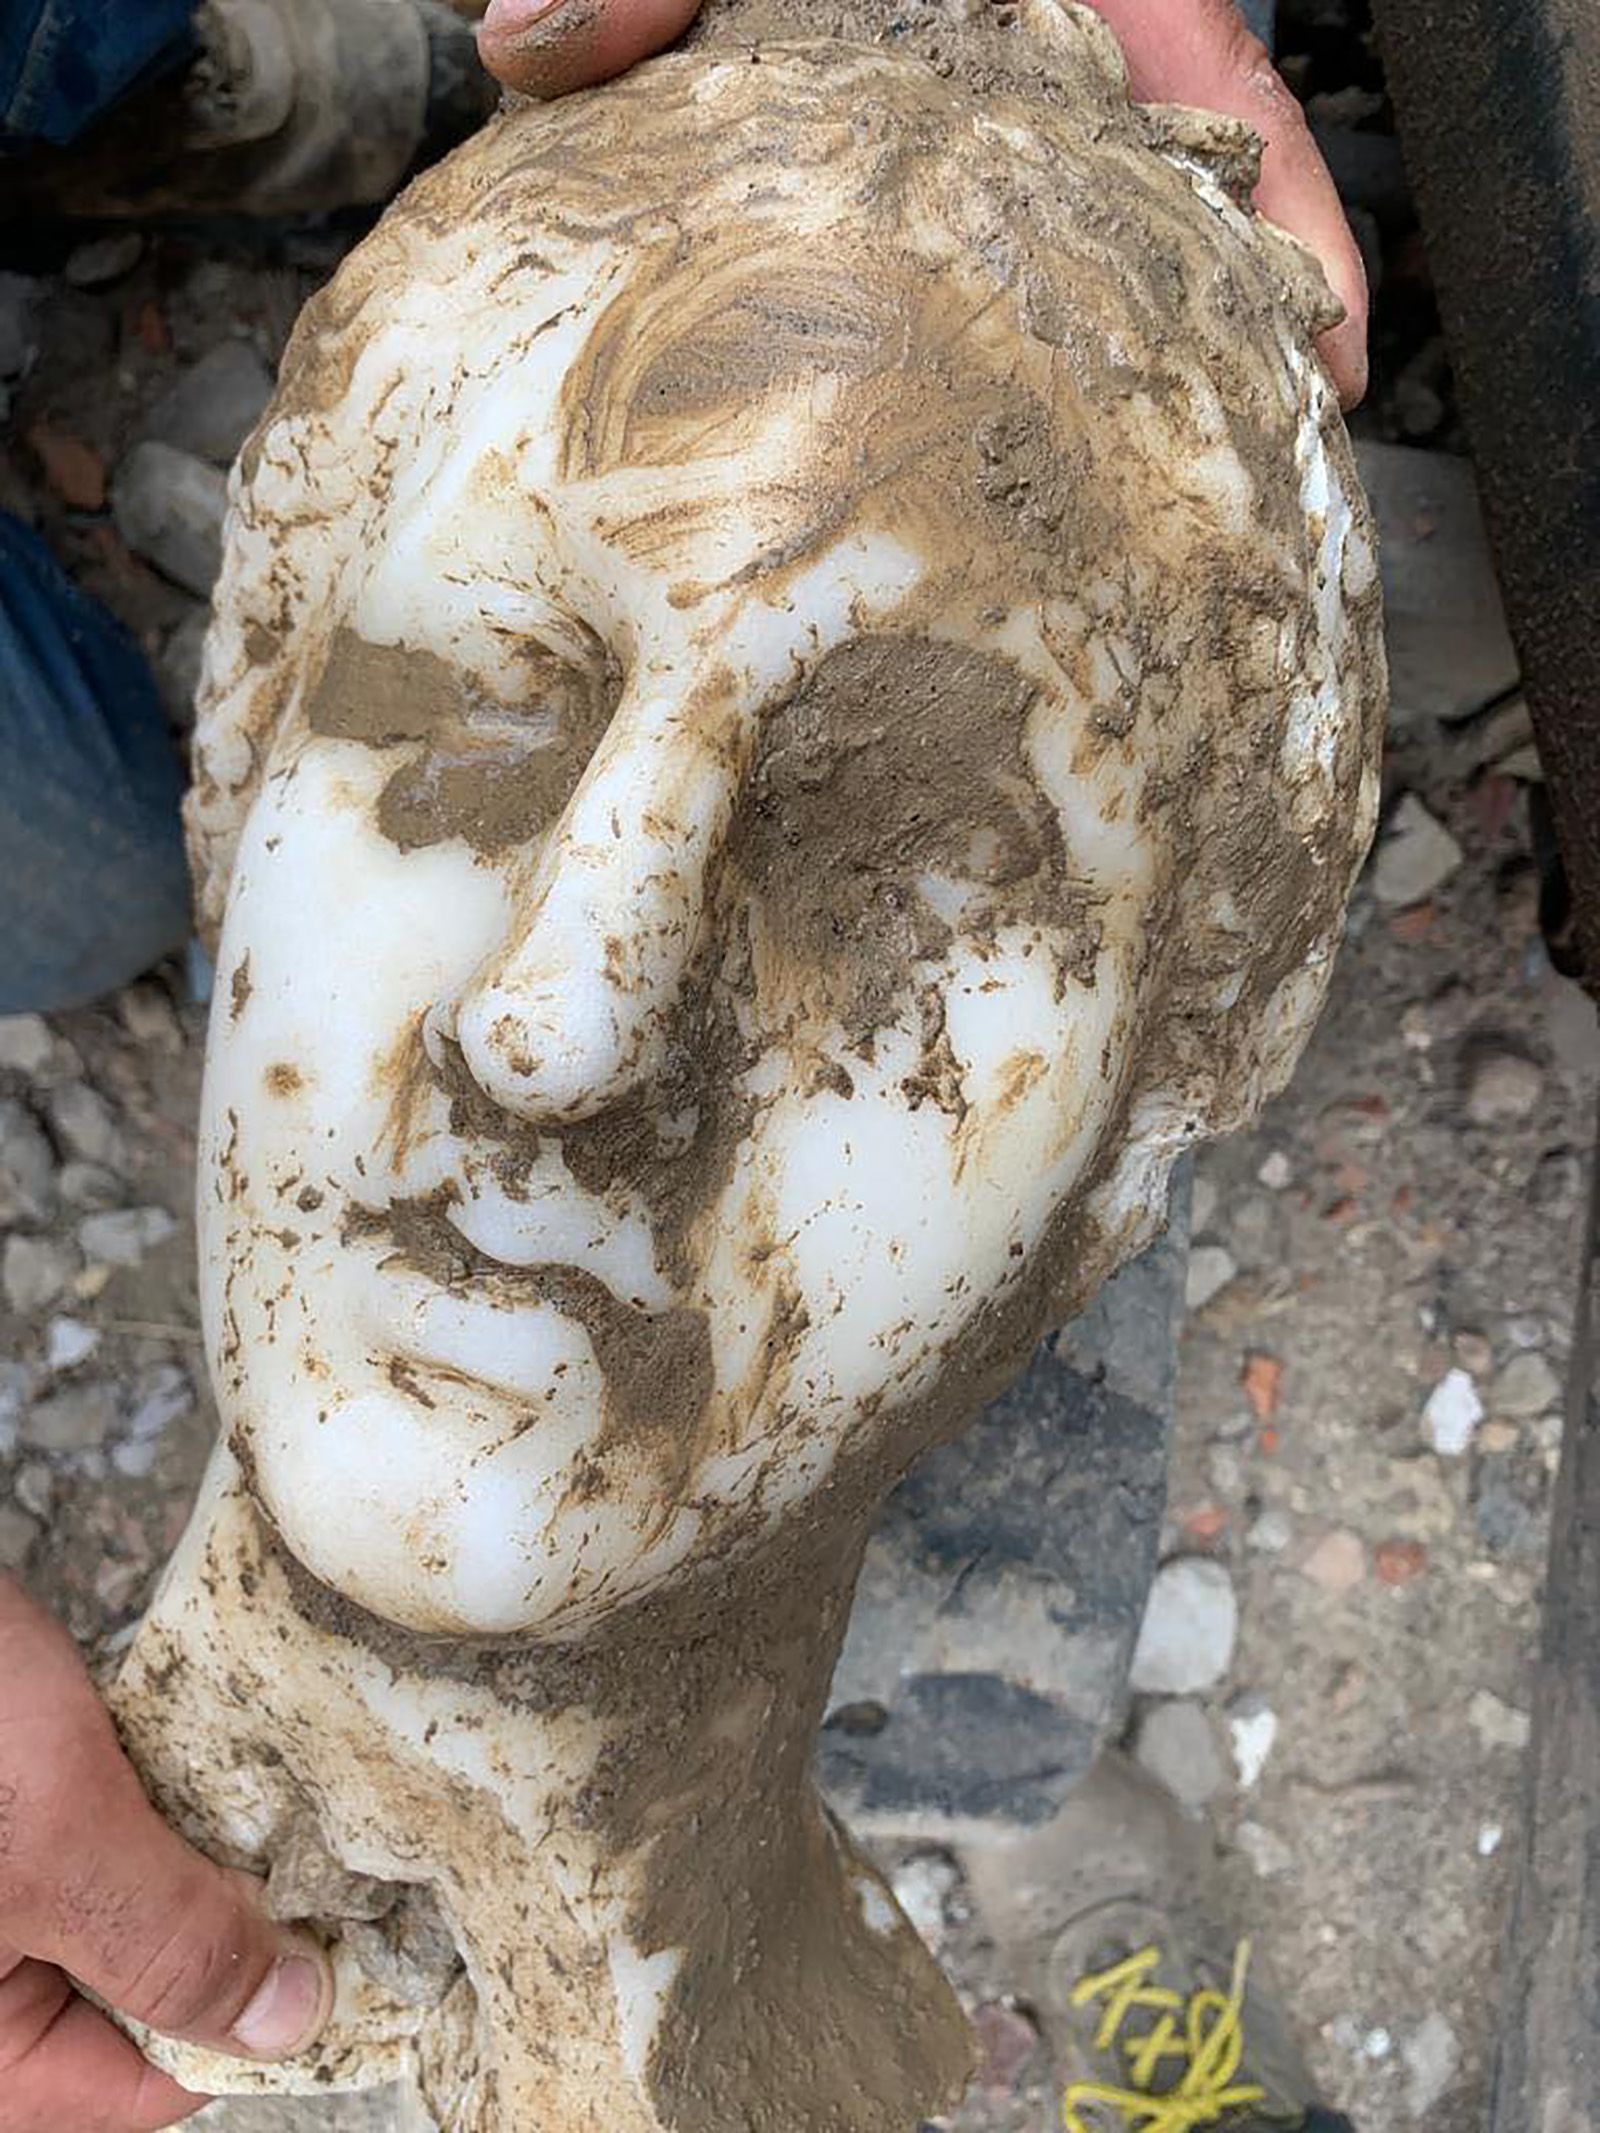 Marble head unearthed during works in Rome piazza